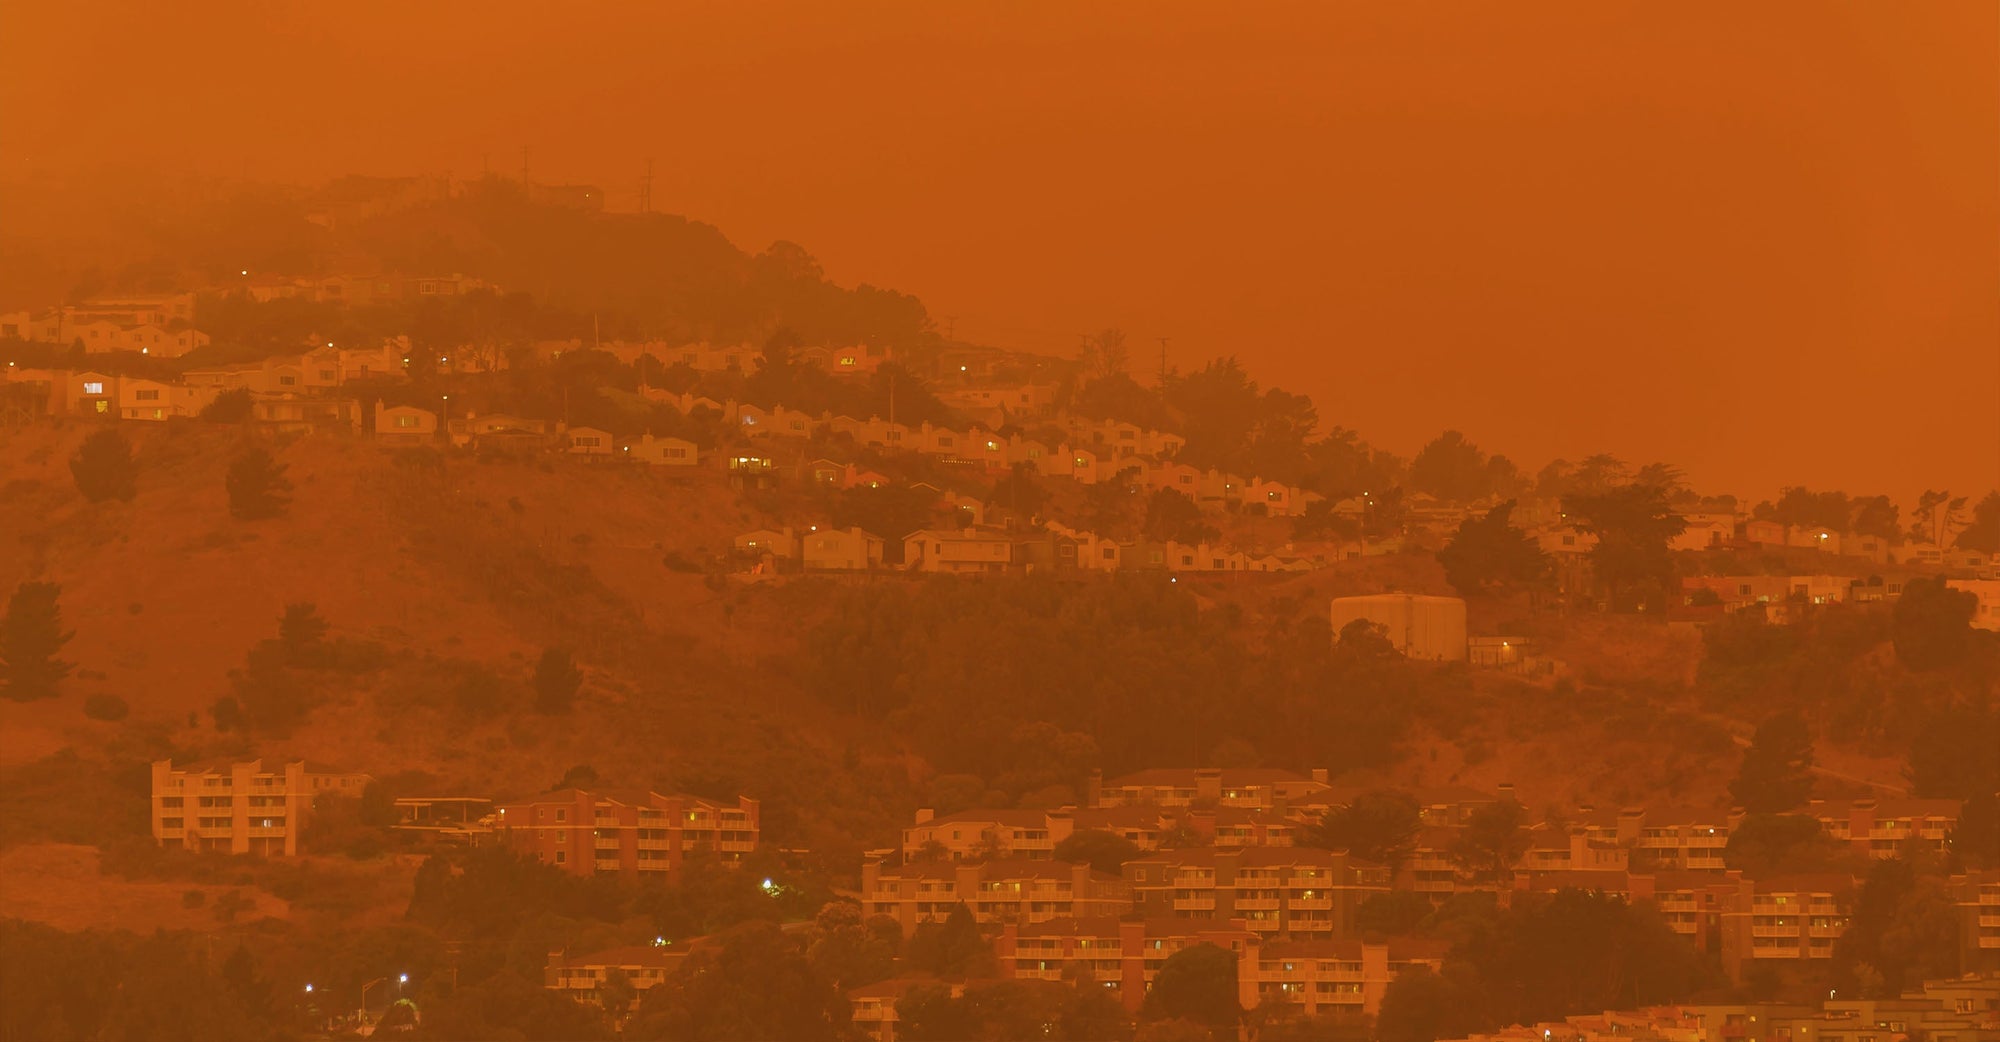 Poor air quality obscures visibility around houses